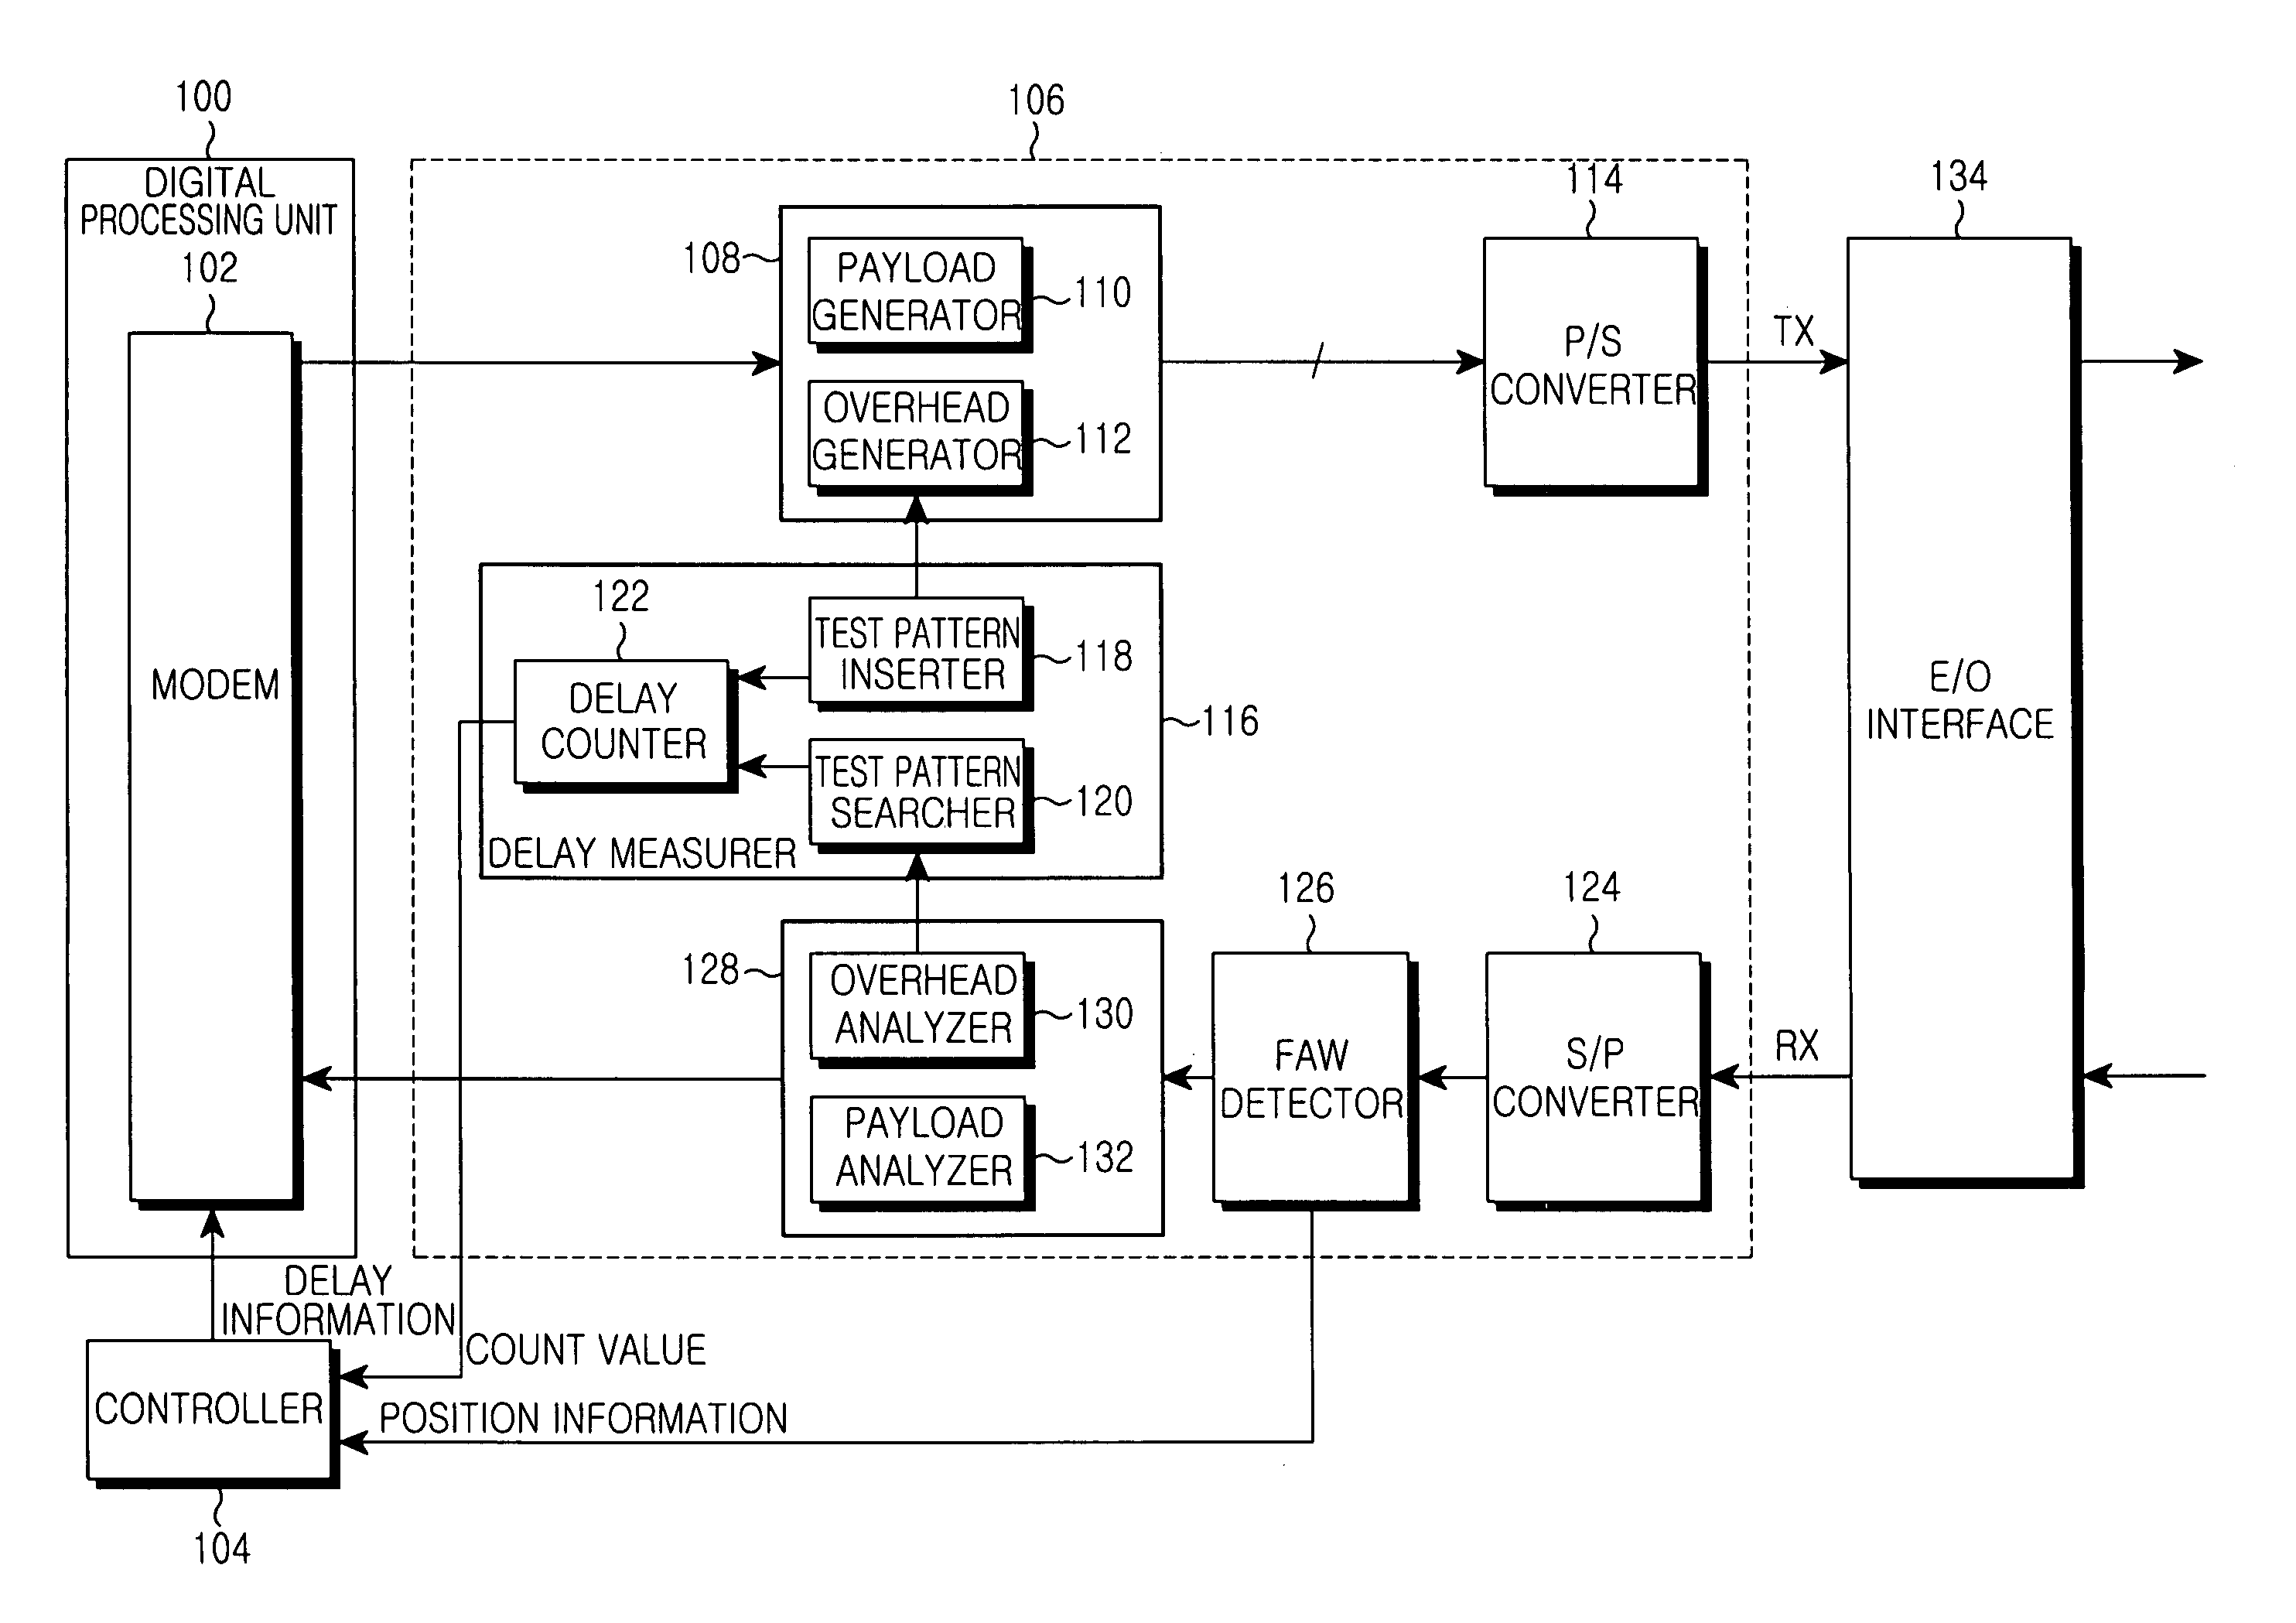 Apparatus and method for measuring and compensating delay between main base station and remote base station interconnected by an optical cable